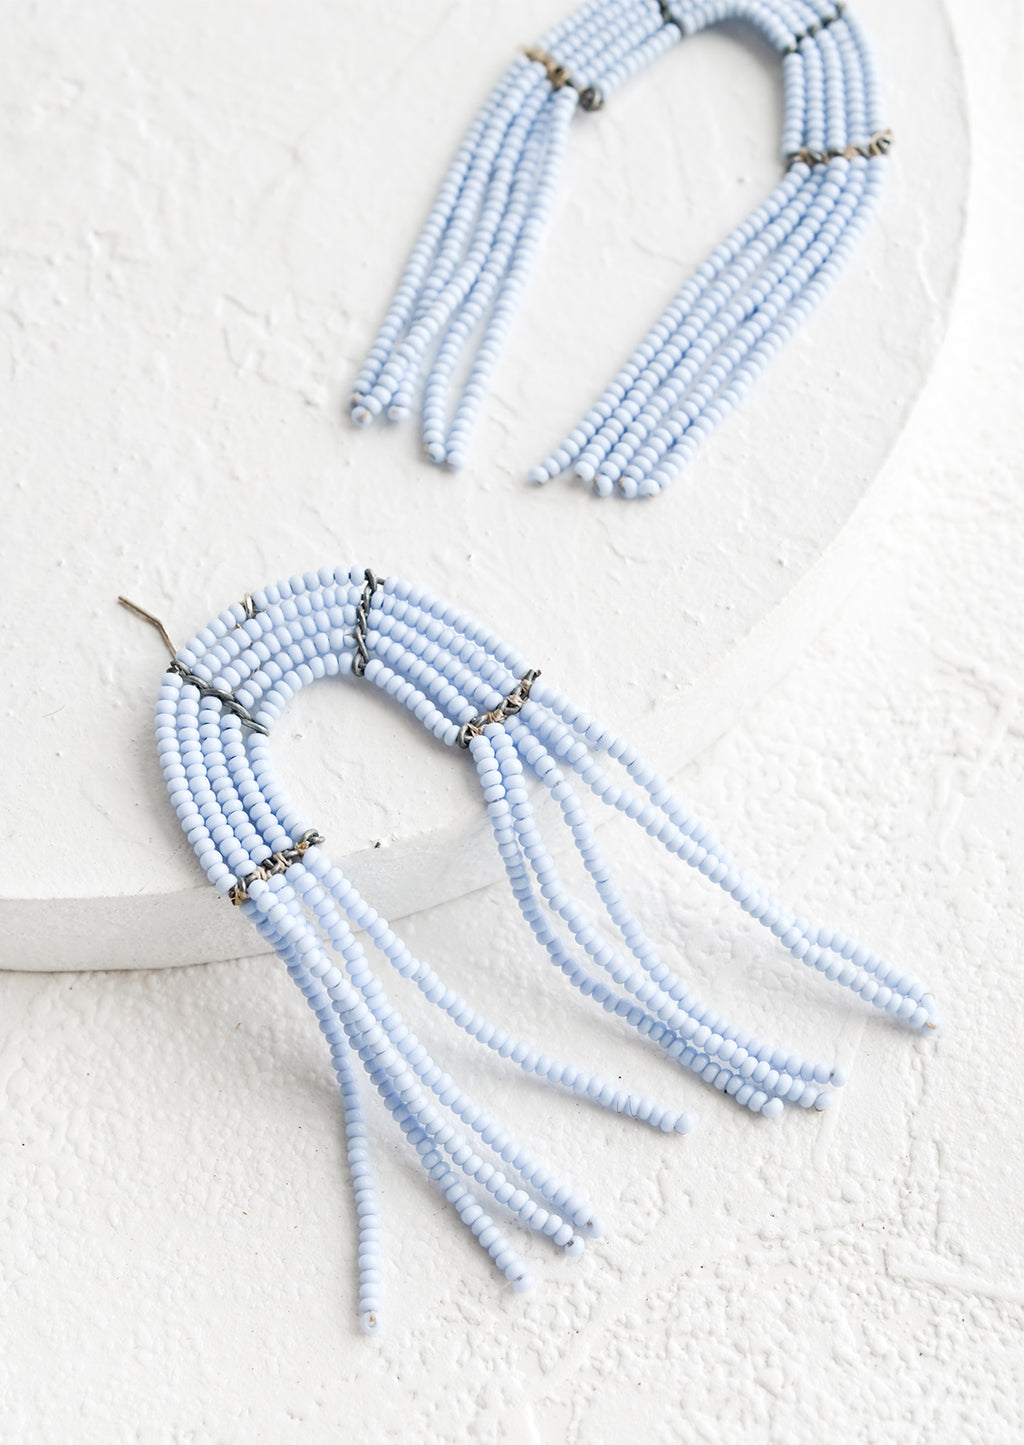 Periwinkle: Arch shaped beaded earrings with fringed silhouette in periwinkle.